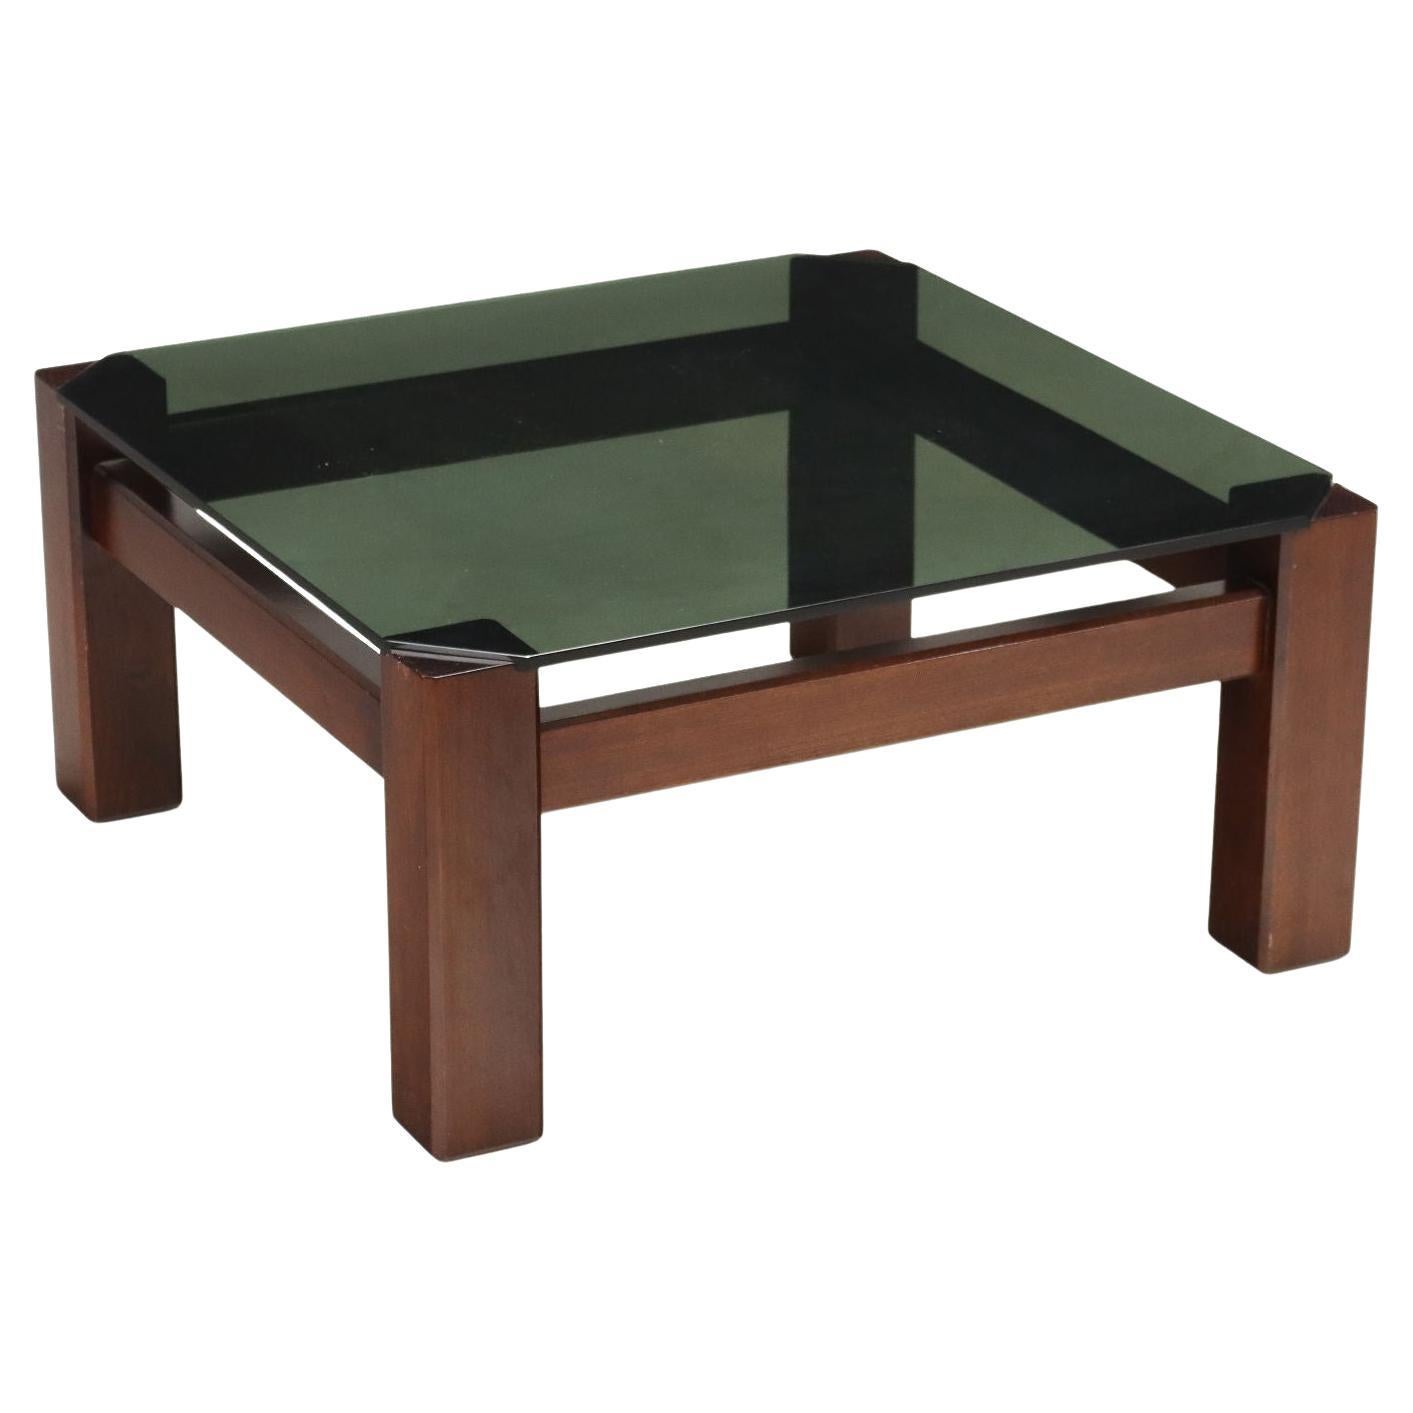 70s-80s square coffee table For Sale